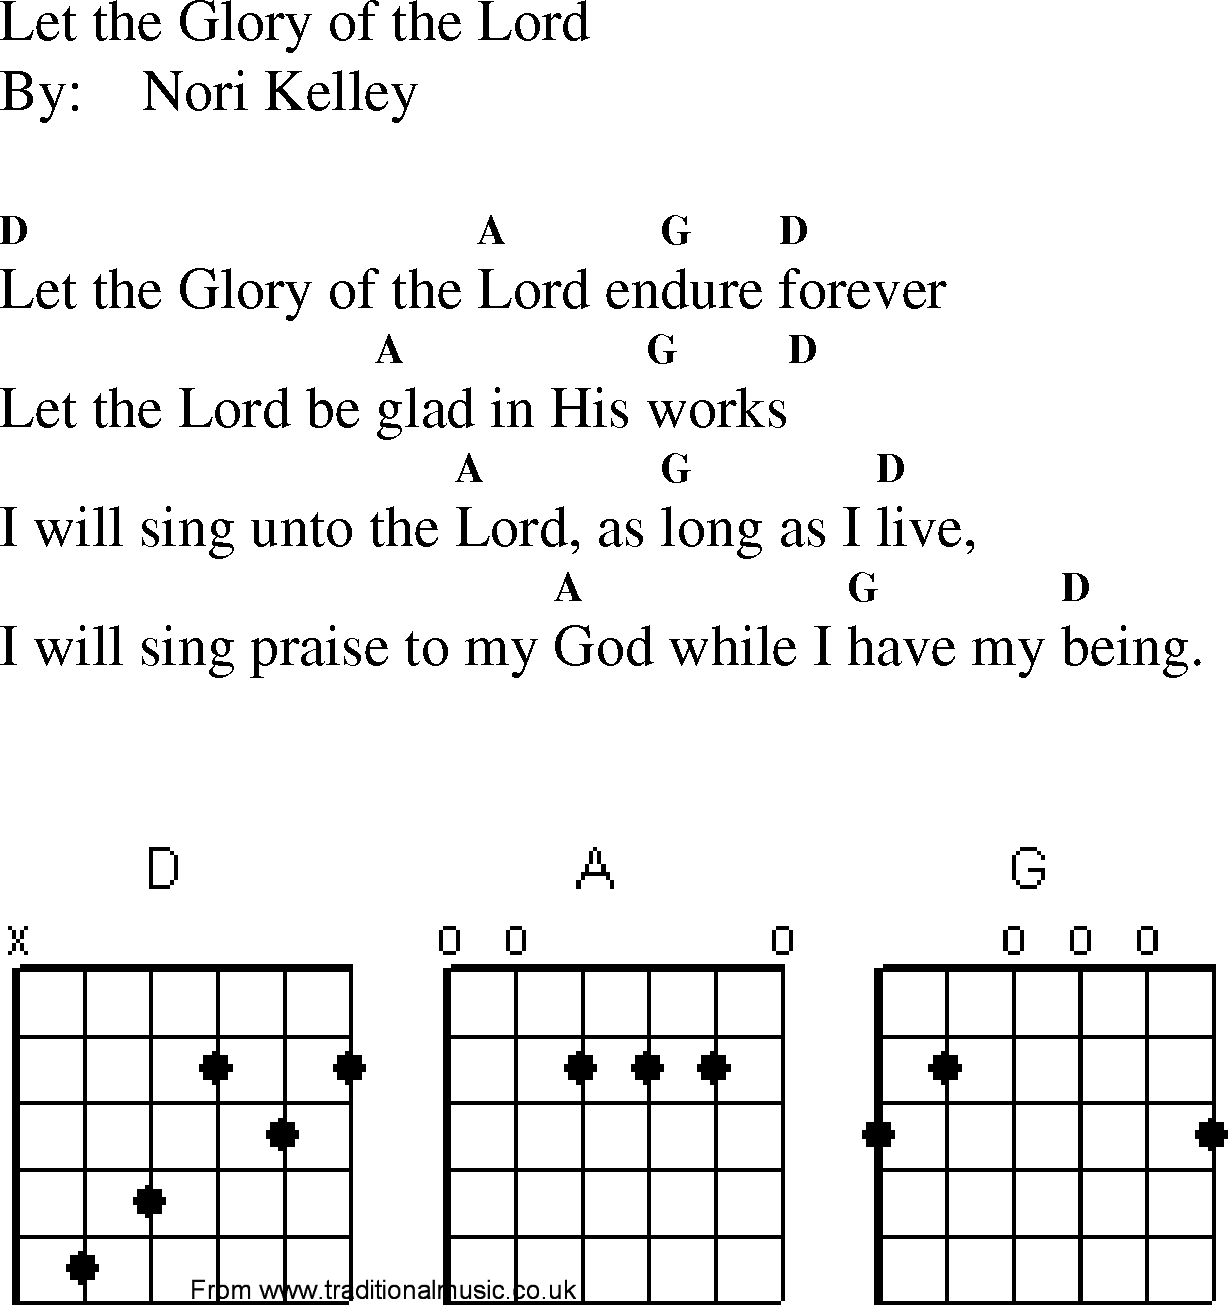 Gospel Song: let_the_glory_of_the_lord, lyrics and chords.